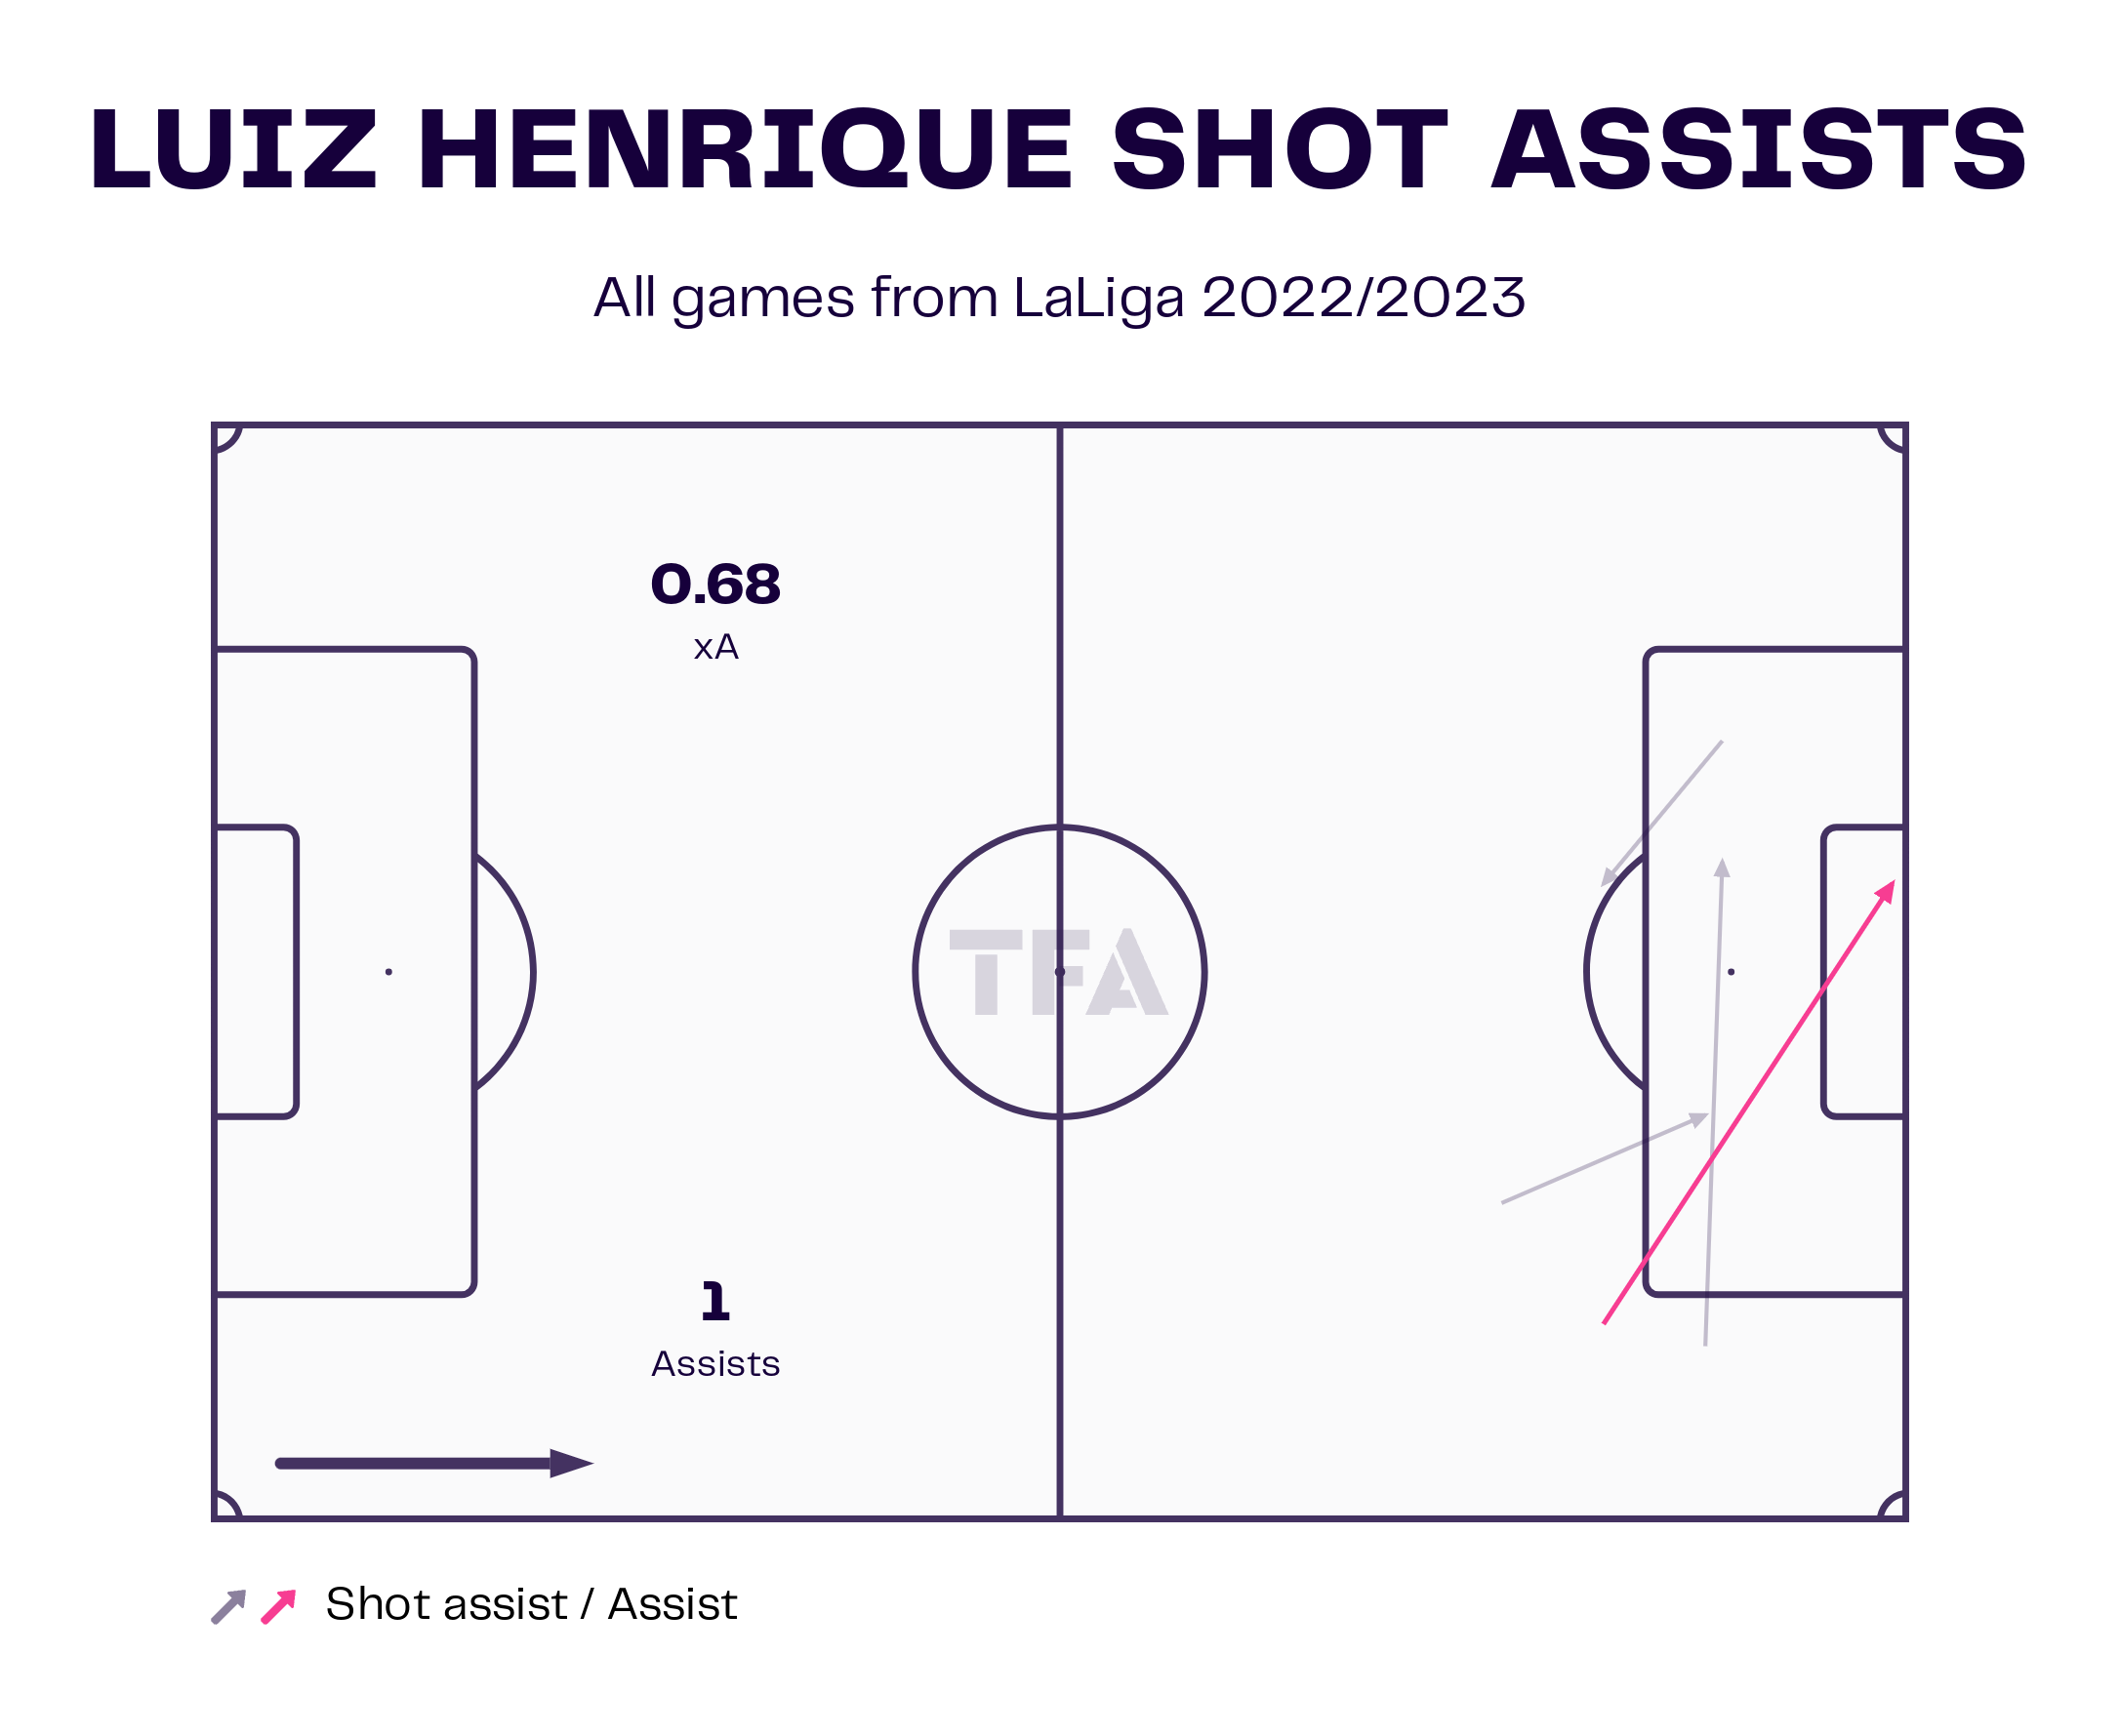 Luis Henrique - Real Betis: data, statistics, analysis and scouting report